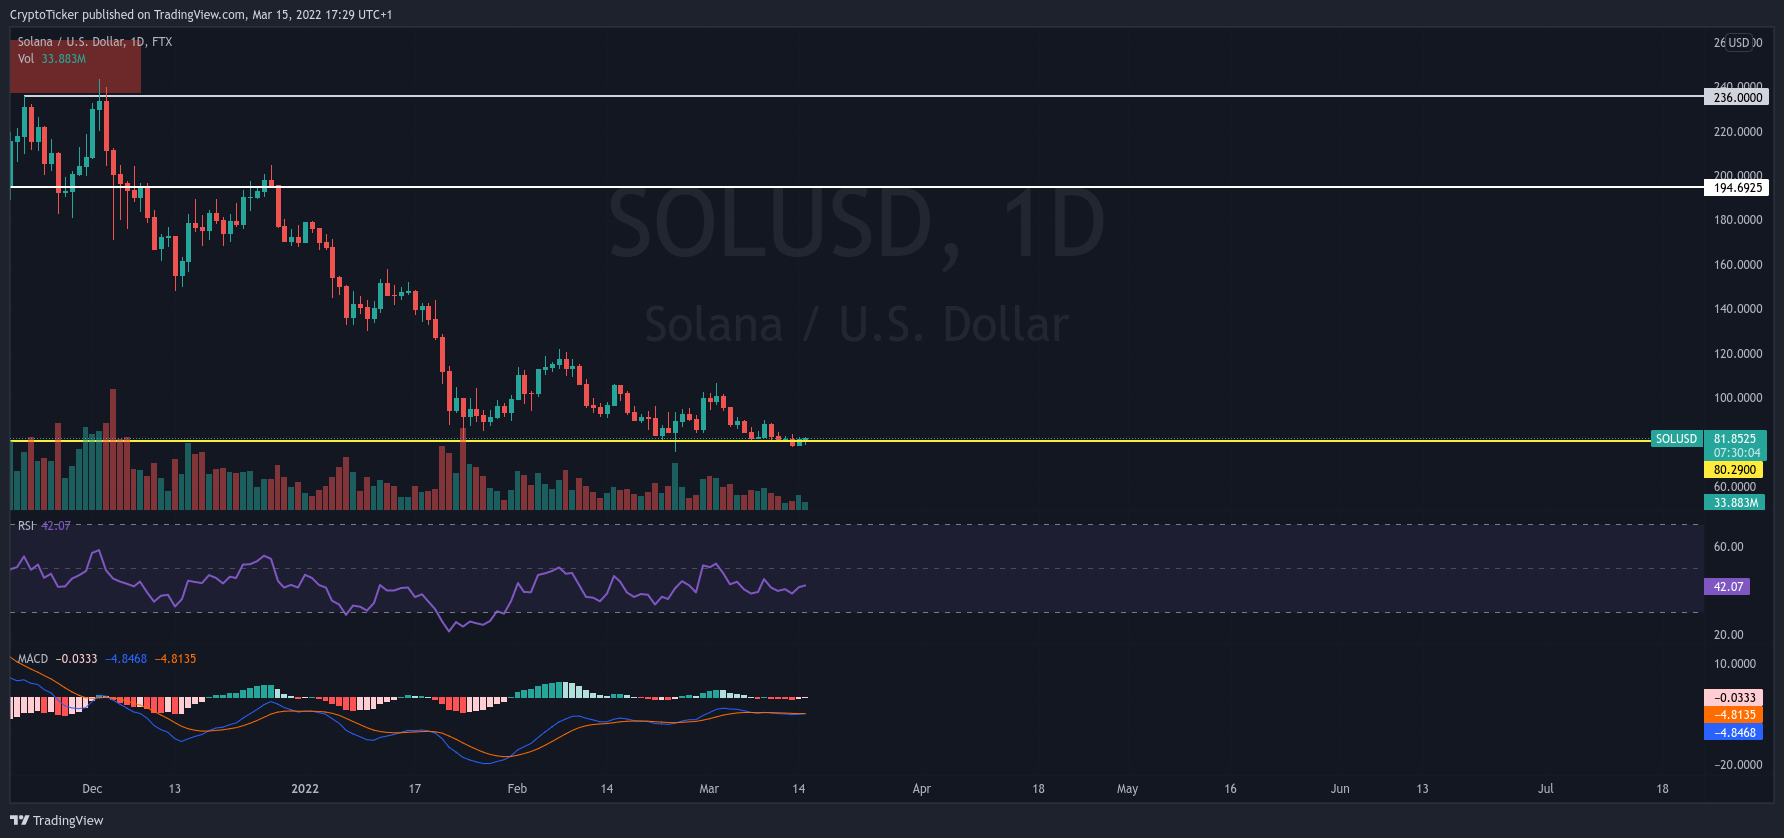 SOL/USD 1-day chart showing Solana token prices